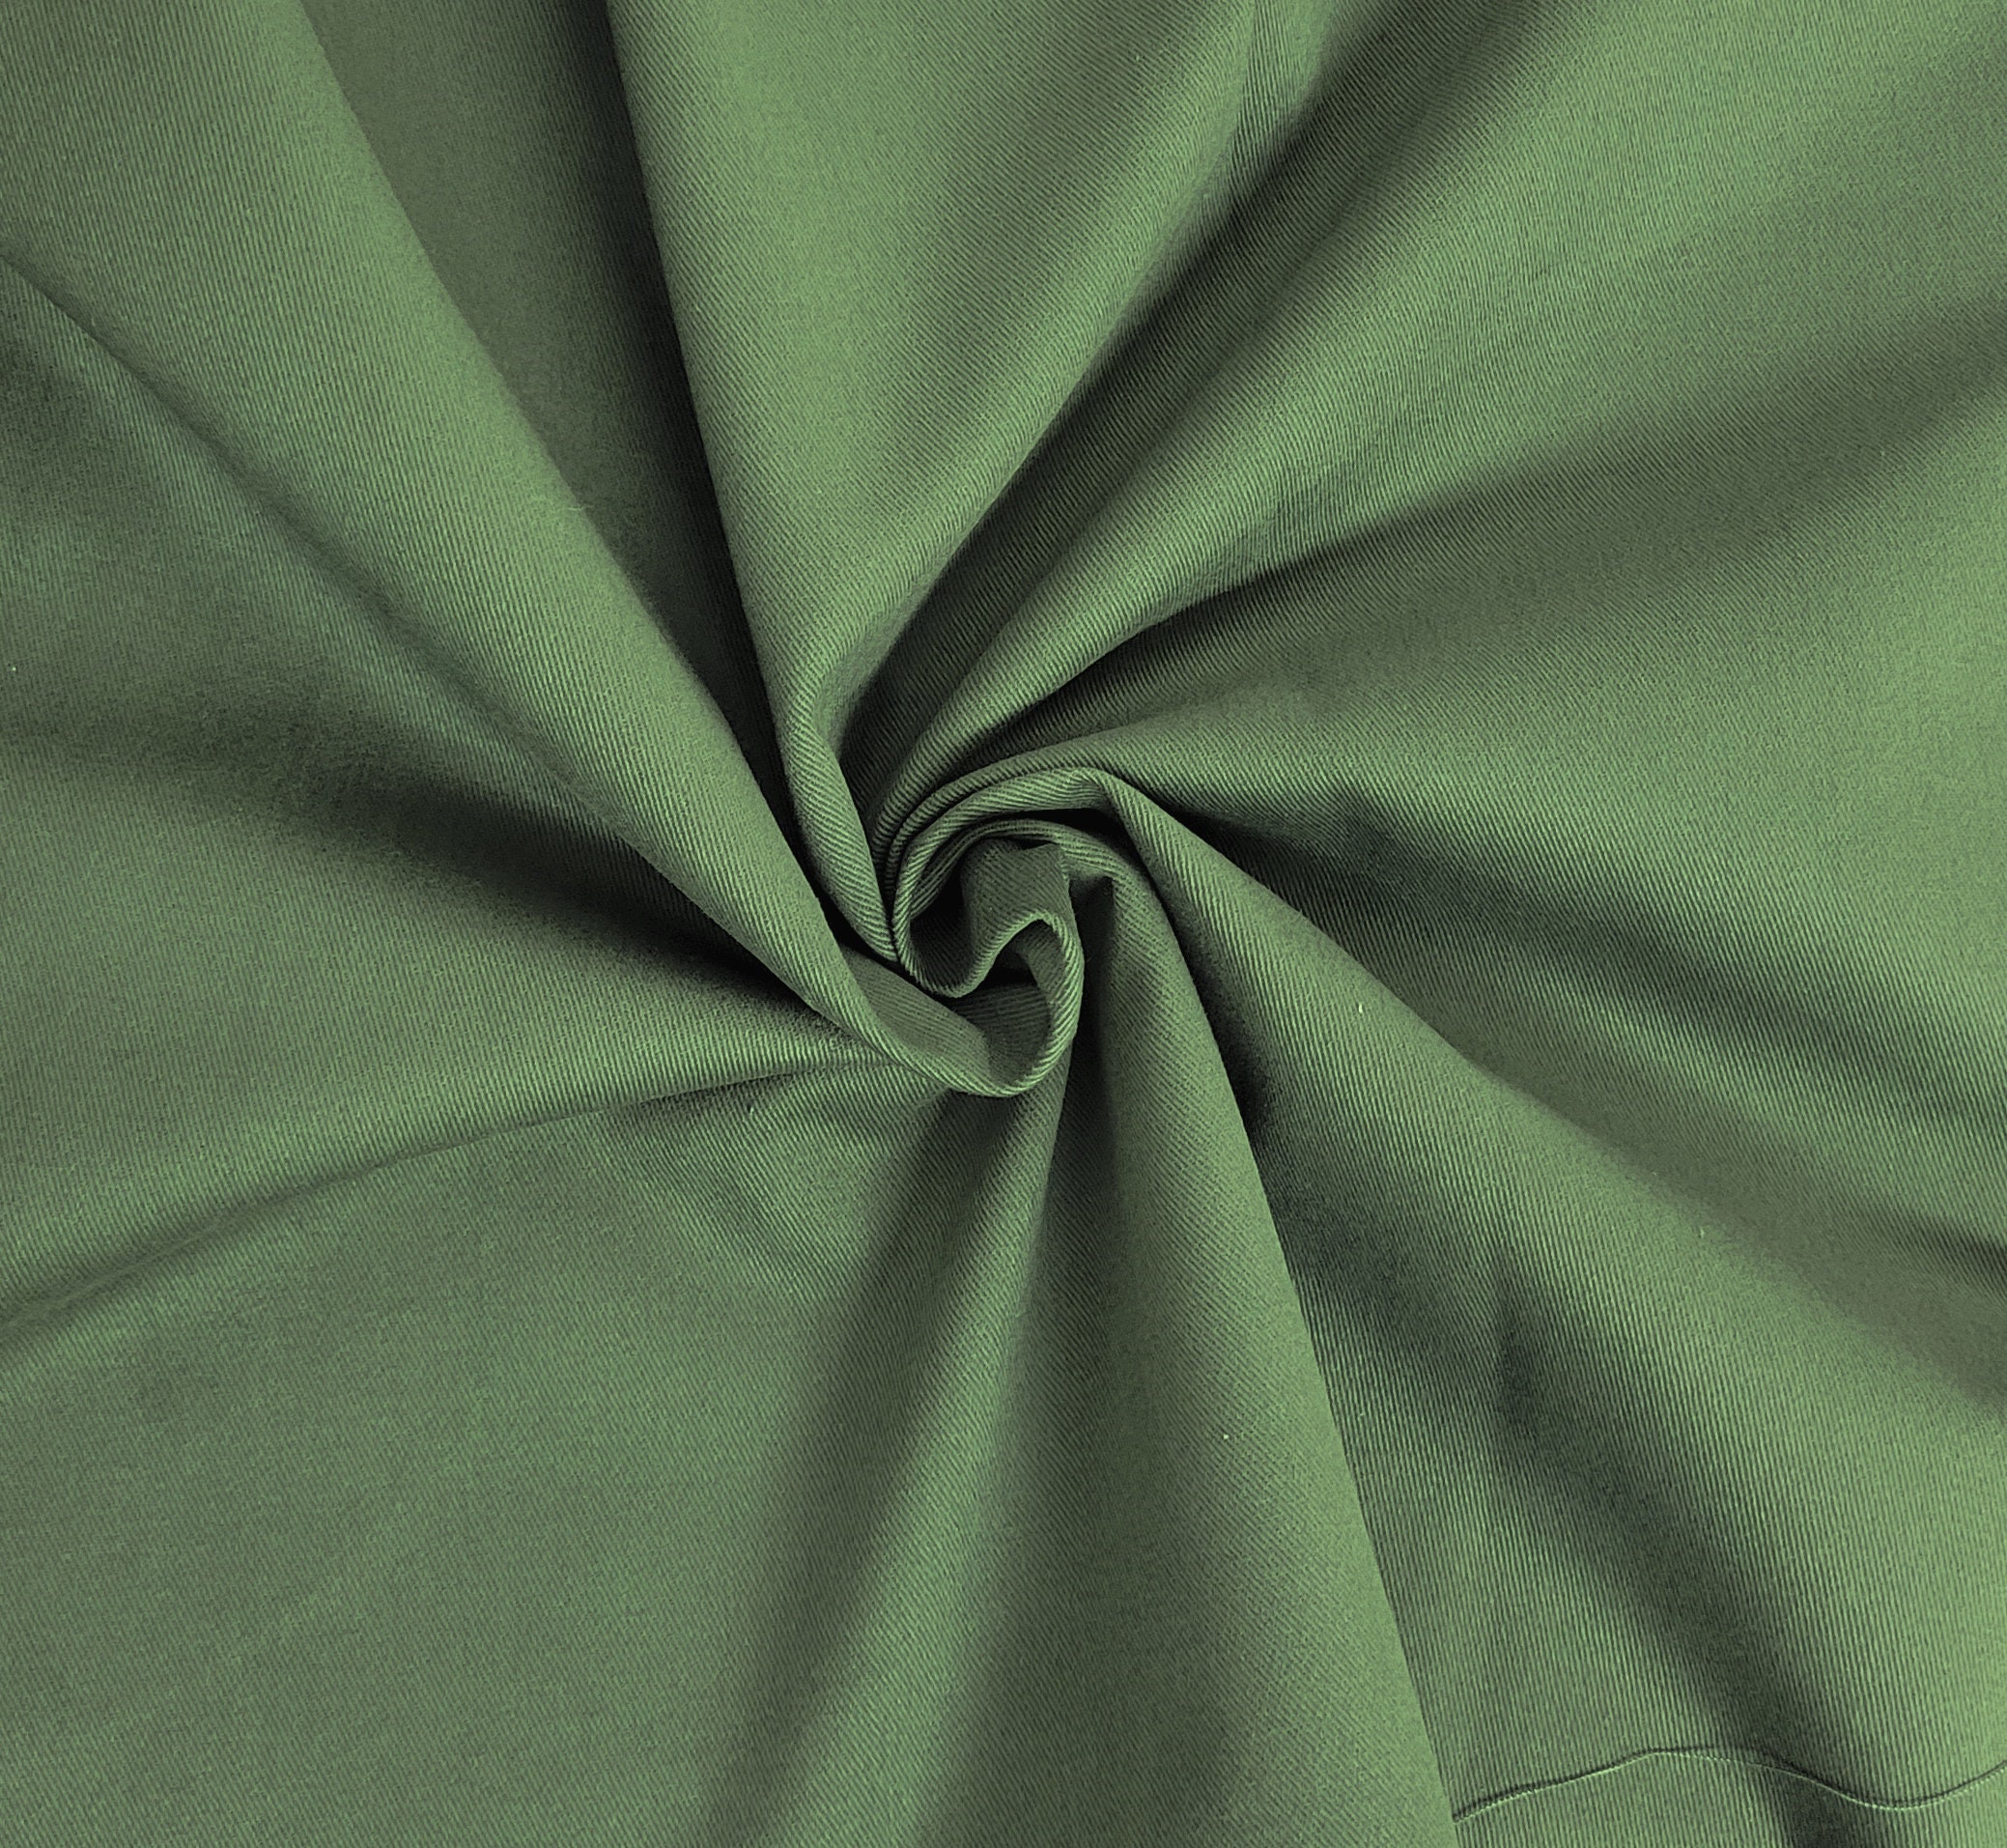 SALE Polyester-Nylon Twill Lining Fabric 5583 Light Olive, by the yard